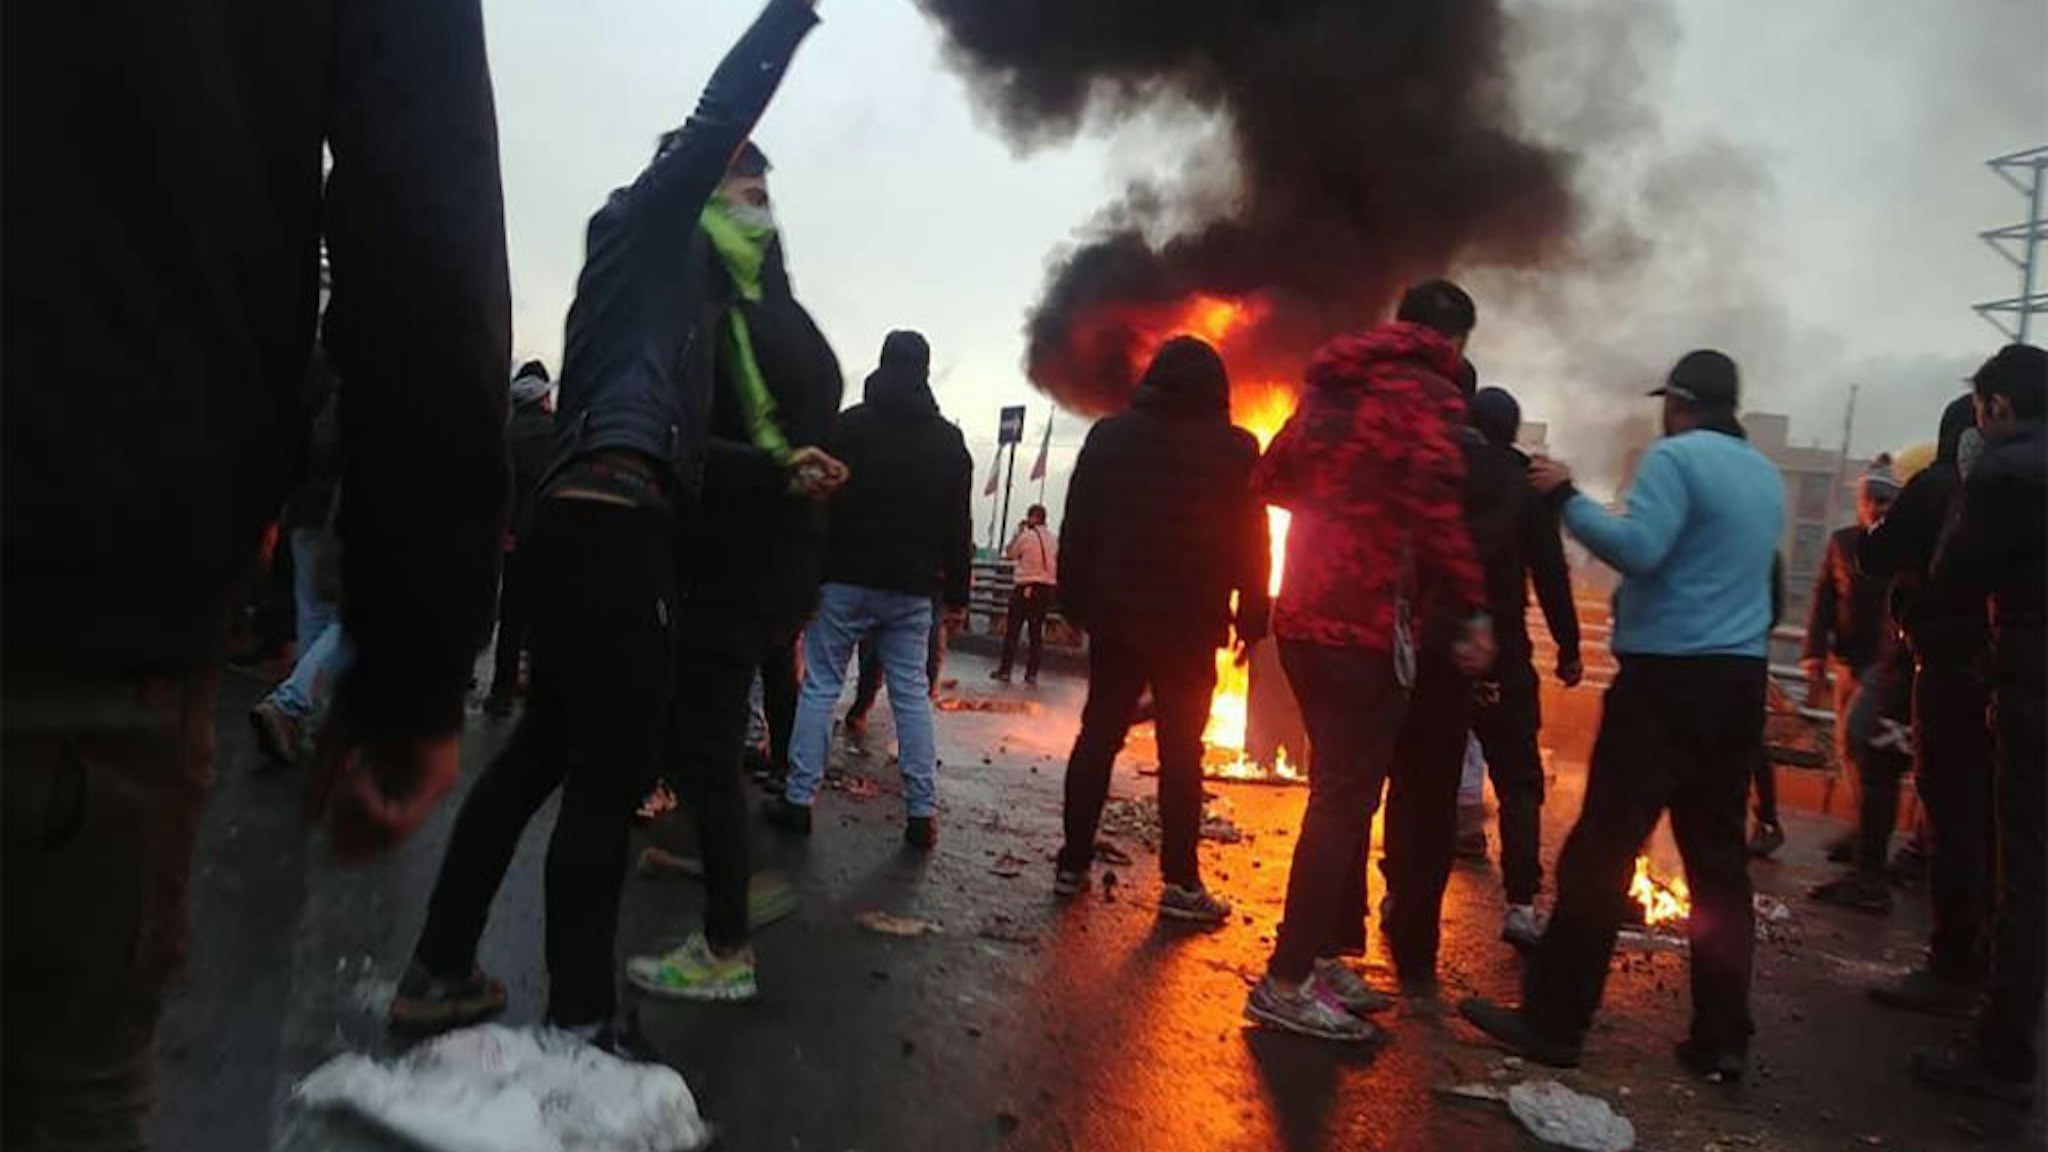 Iranian protesters gather around a fire during a demonstration against an increase in gasoline prices in the capital Tehran, on November 16, 2019.